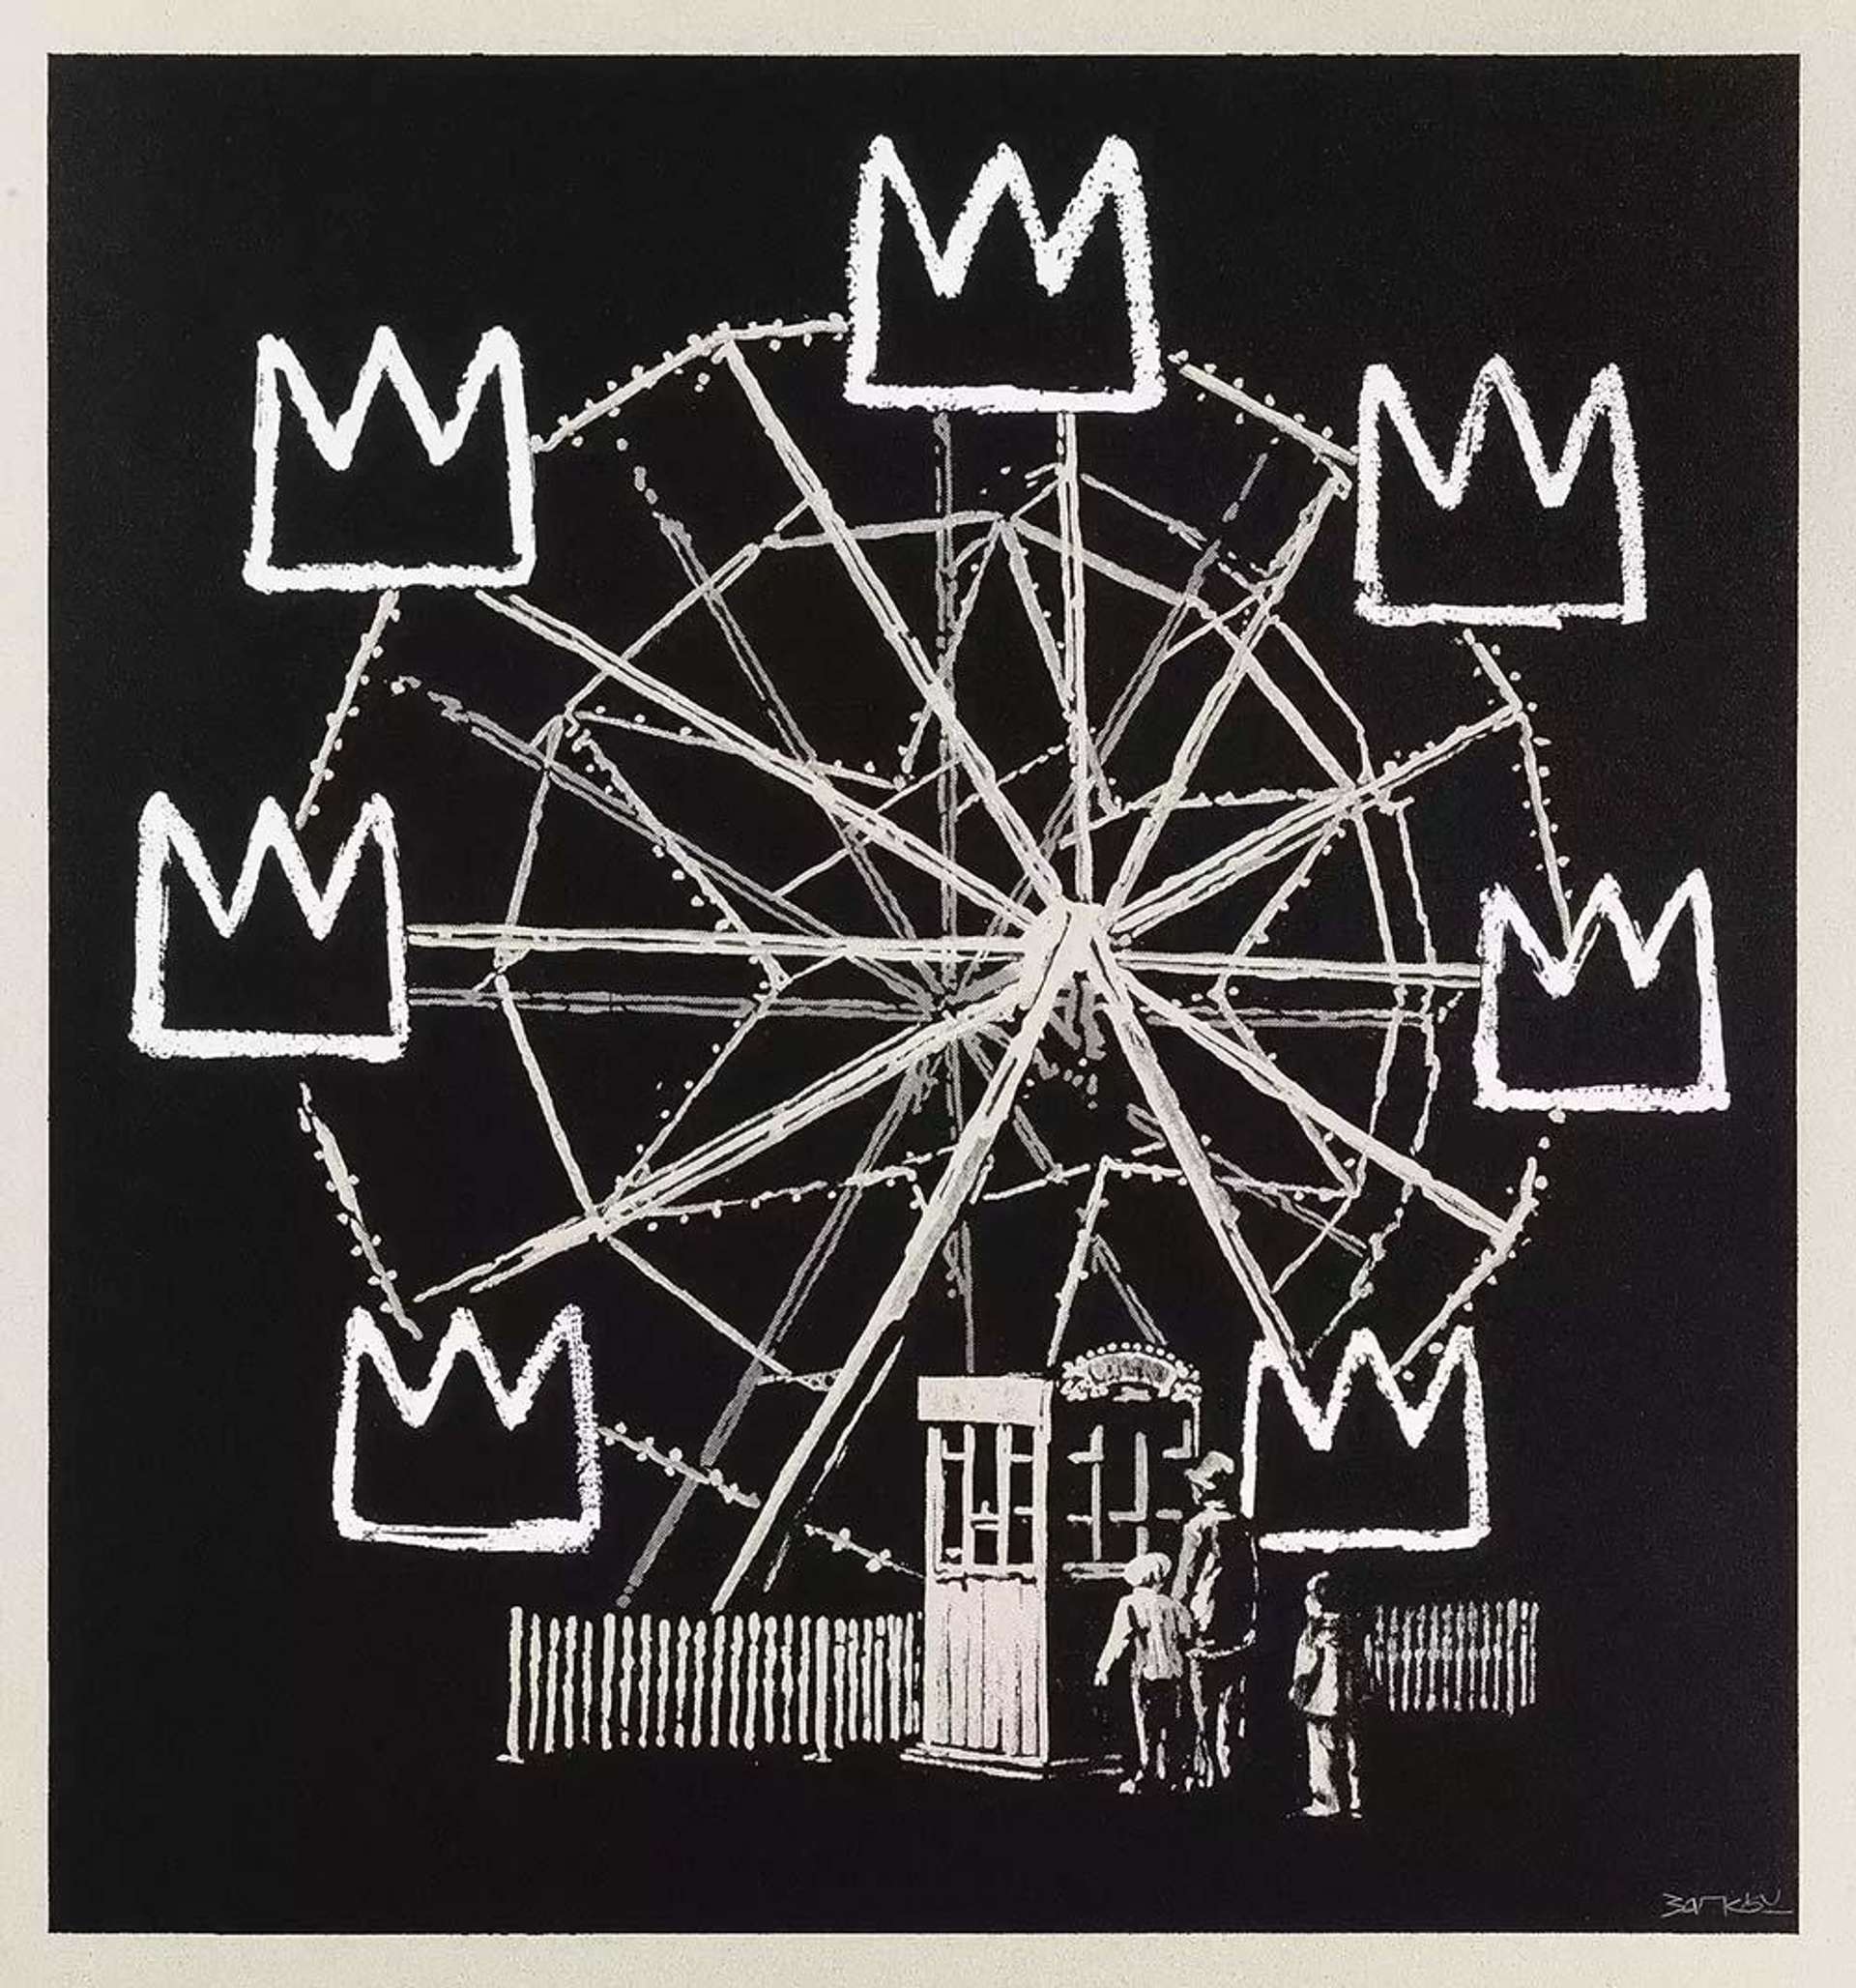 A ferris wheel is printed in white at the centre of the composition, against a black background. The ferris wheel has crowns, replacing the traditional carts, in homage to Jean-Michel Basquiat. In front of this ferris wheel is fencing and a fairground ticket booth, with a family standing in queue in the foreground.